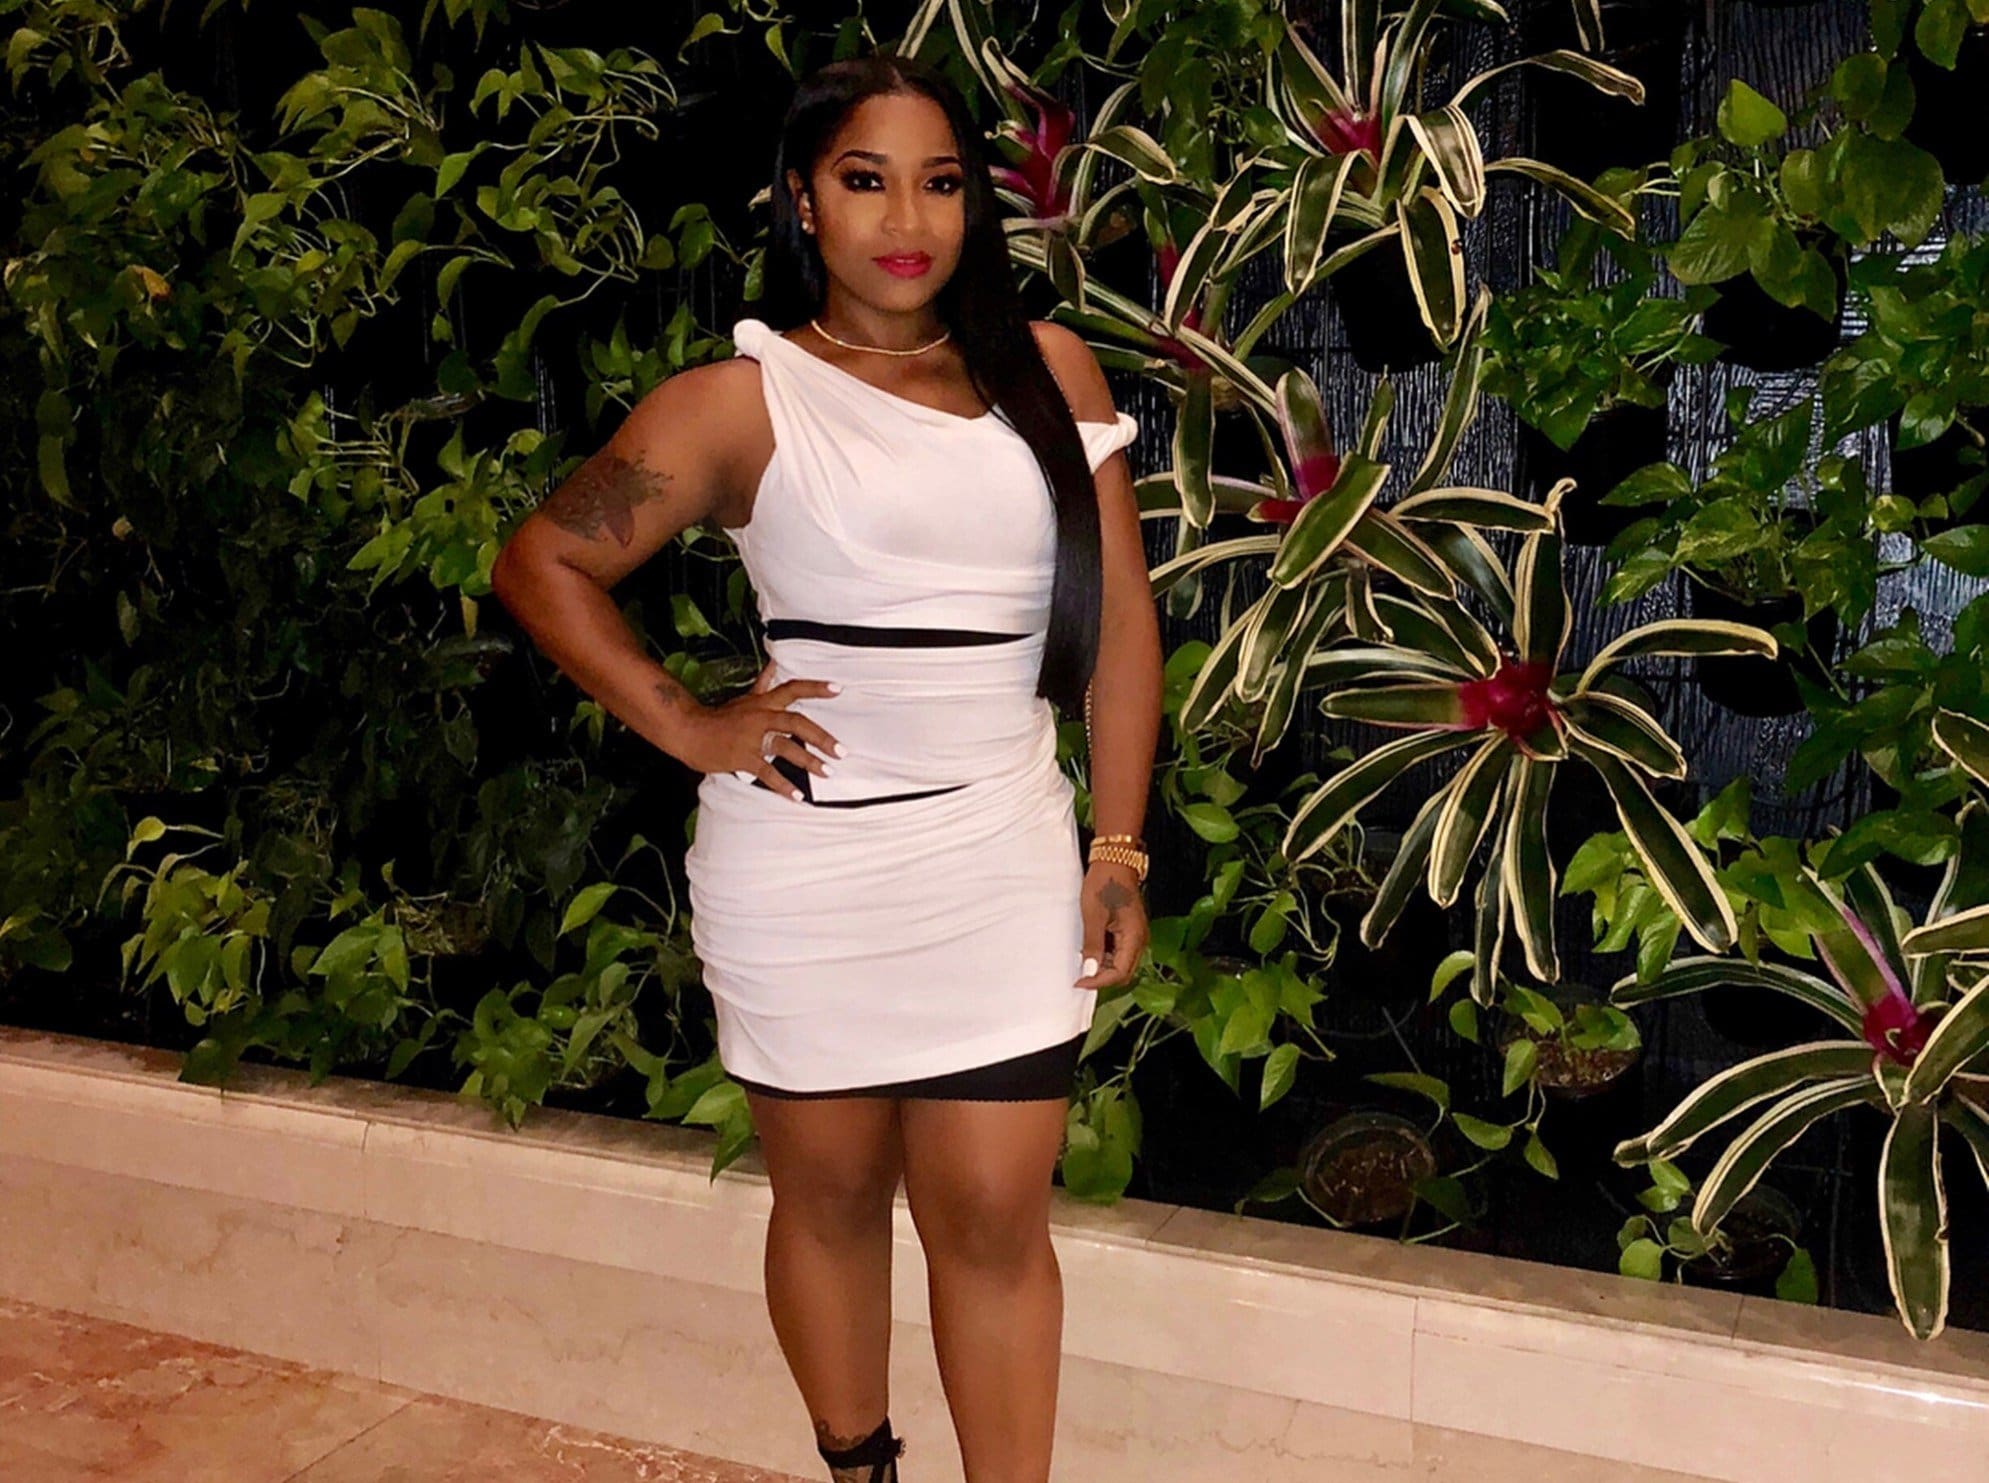 Toya Wright Impresses Fans With A 'Before And After' Post In Which She's Showing Off Her Figure - Kim Zolciak Praises Her